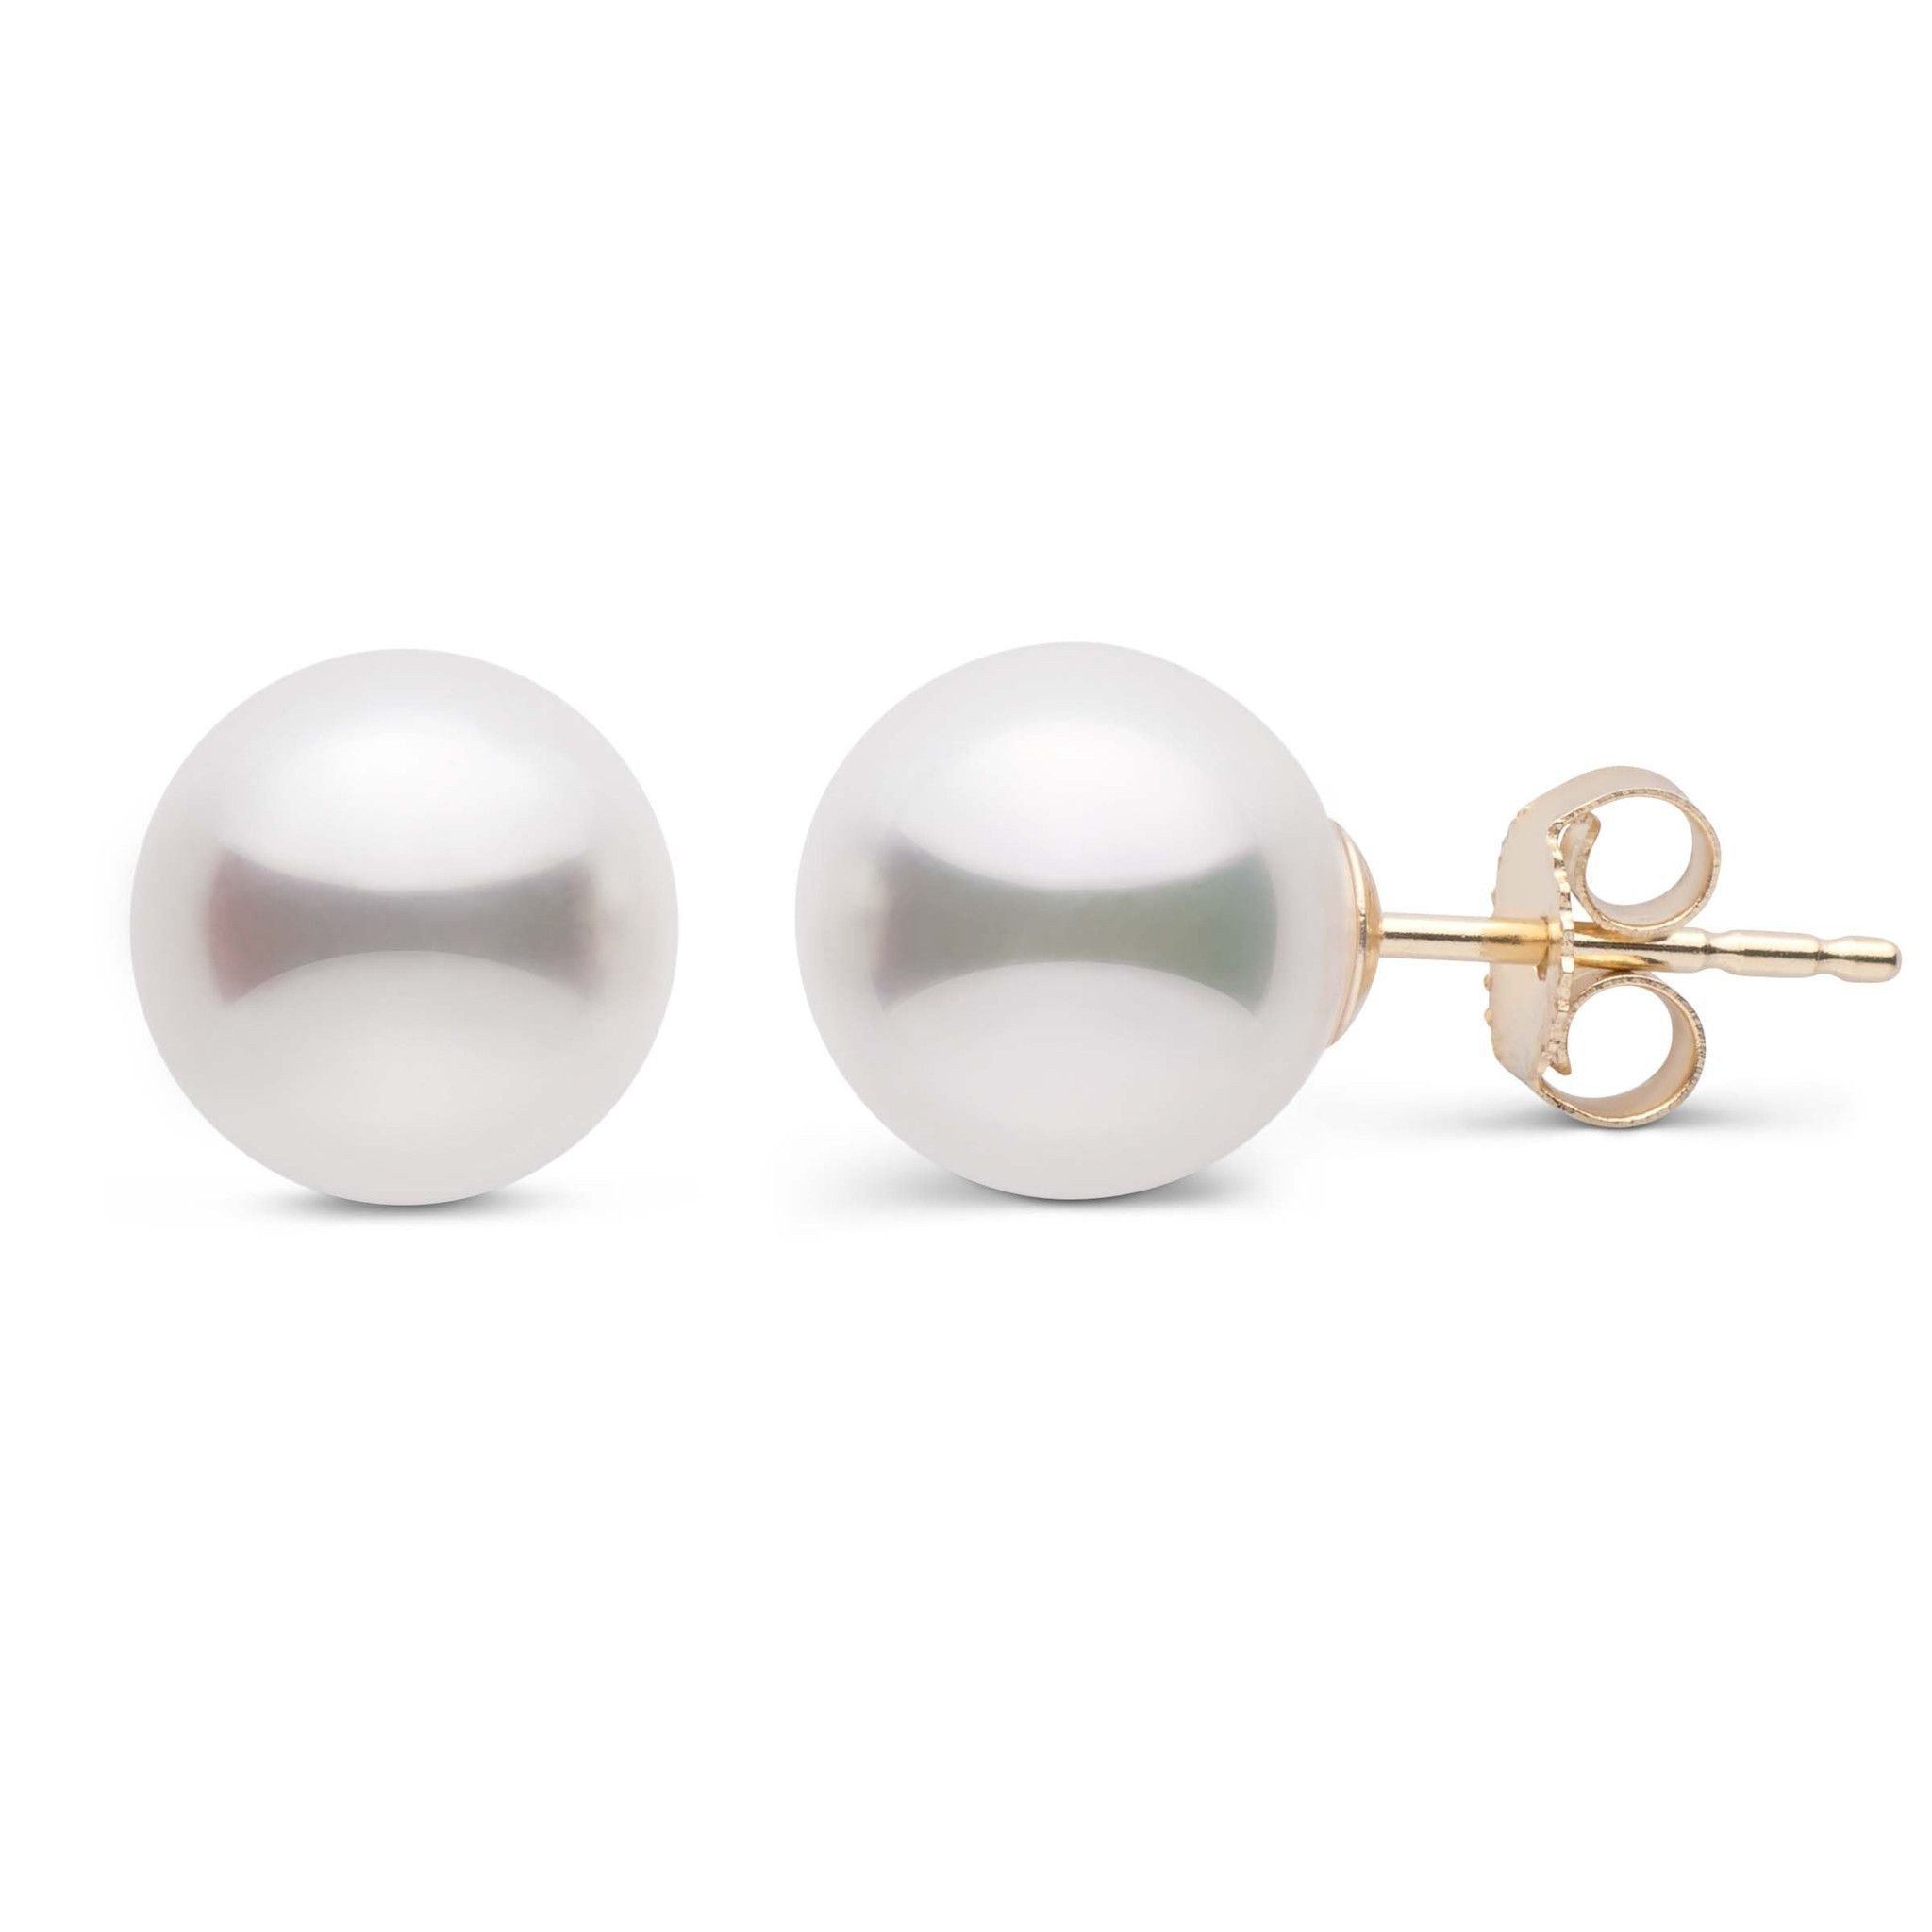 6.5-7.0 mm AAA White Freshwater Pearl Stud Earrings 14K White Gold by Pearl Paradise